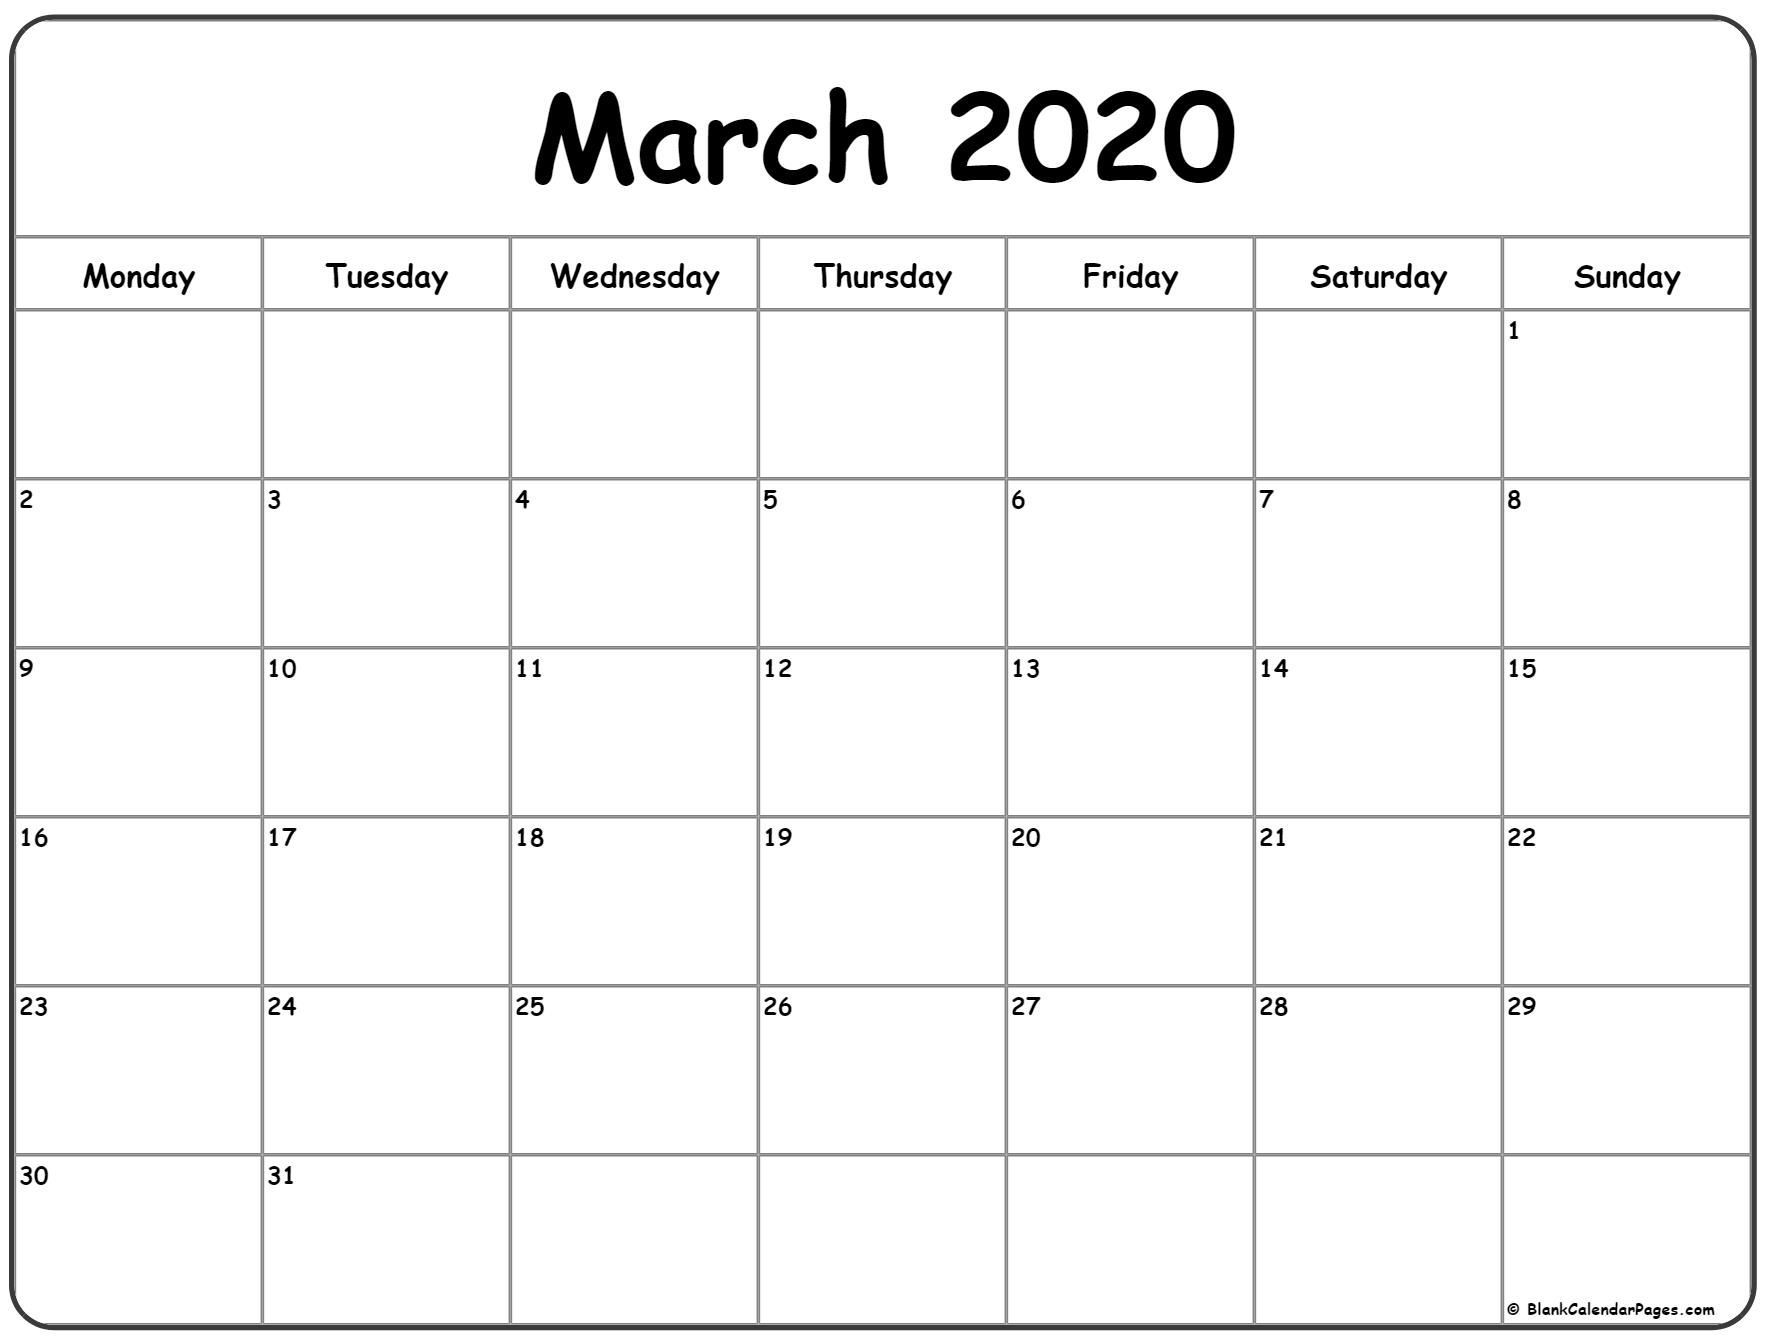 March 2020 Monday Calendar | Monday To Sunday | August